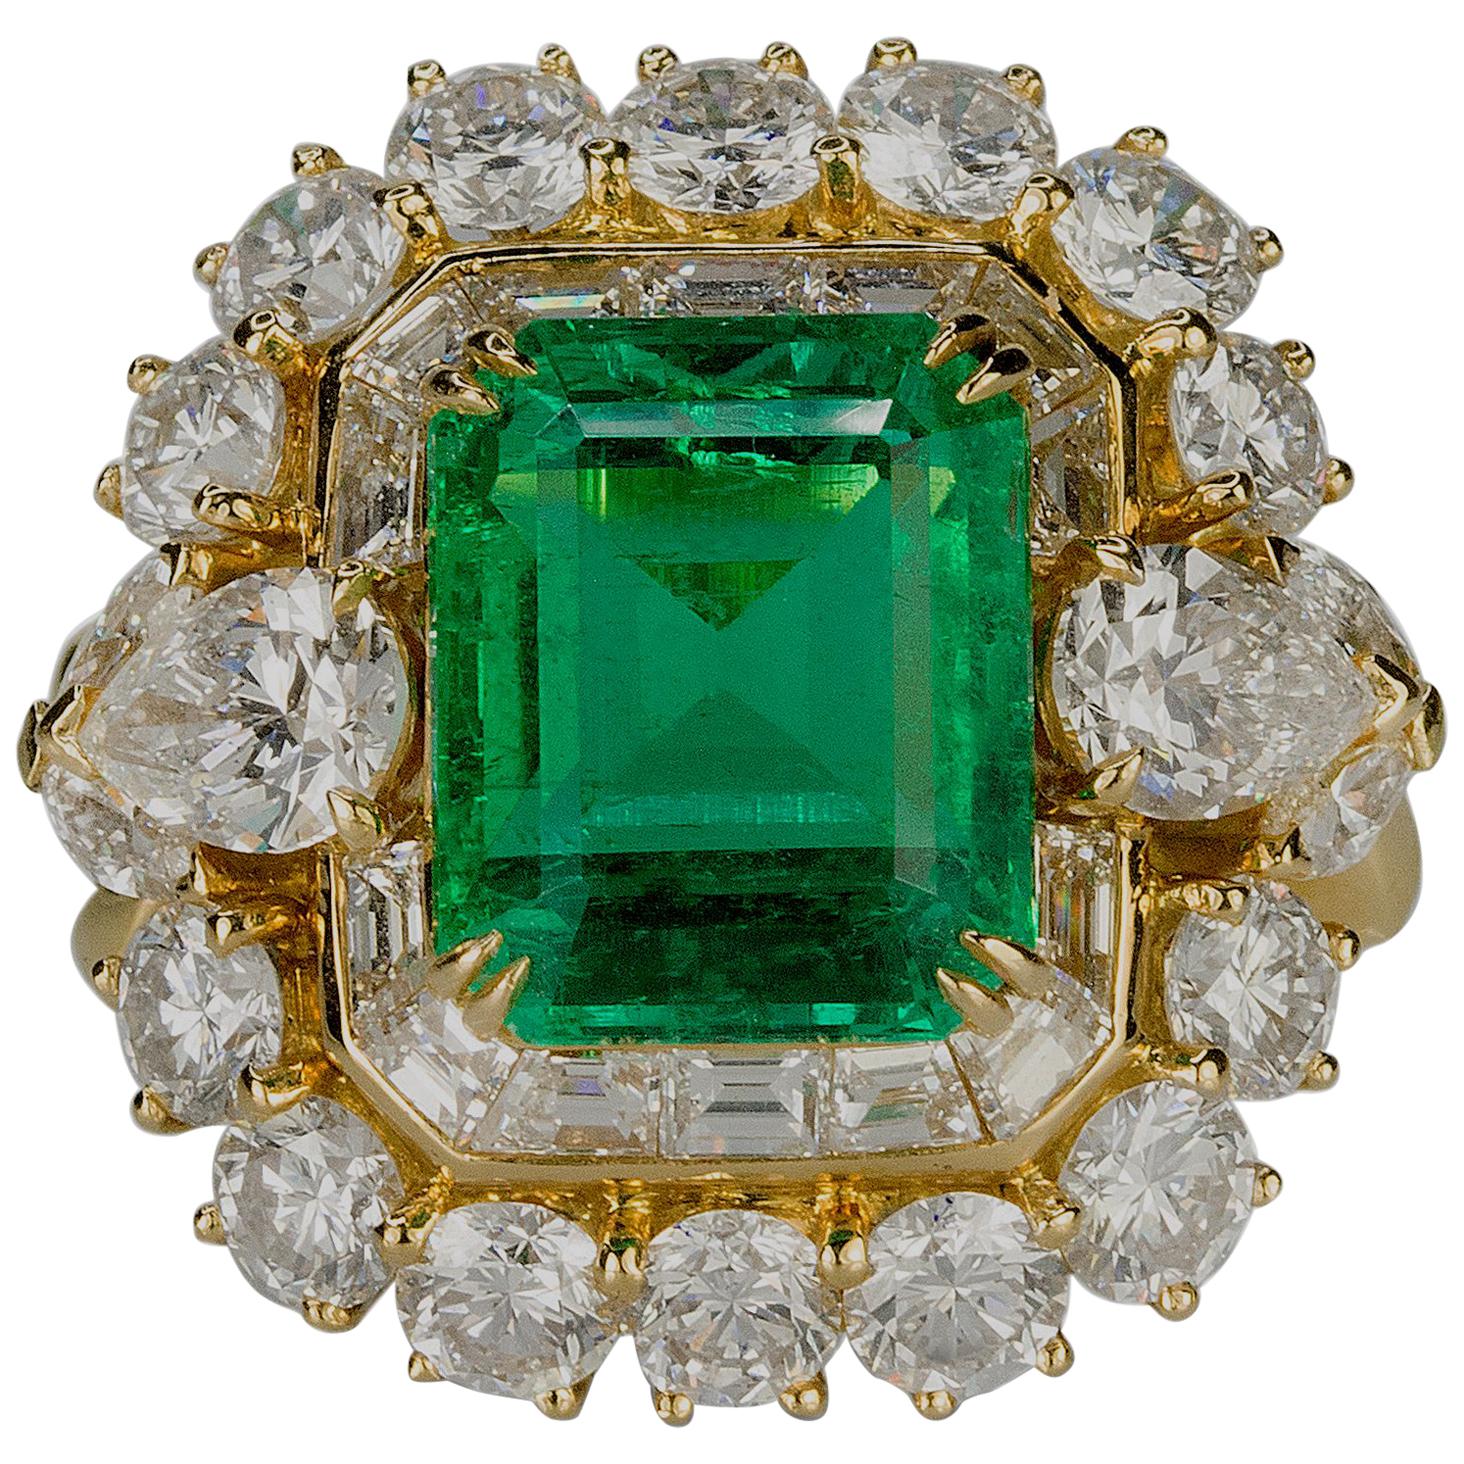 Magnificent 6.25 Carat Colombian Emerald Diamond Ring